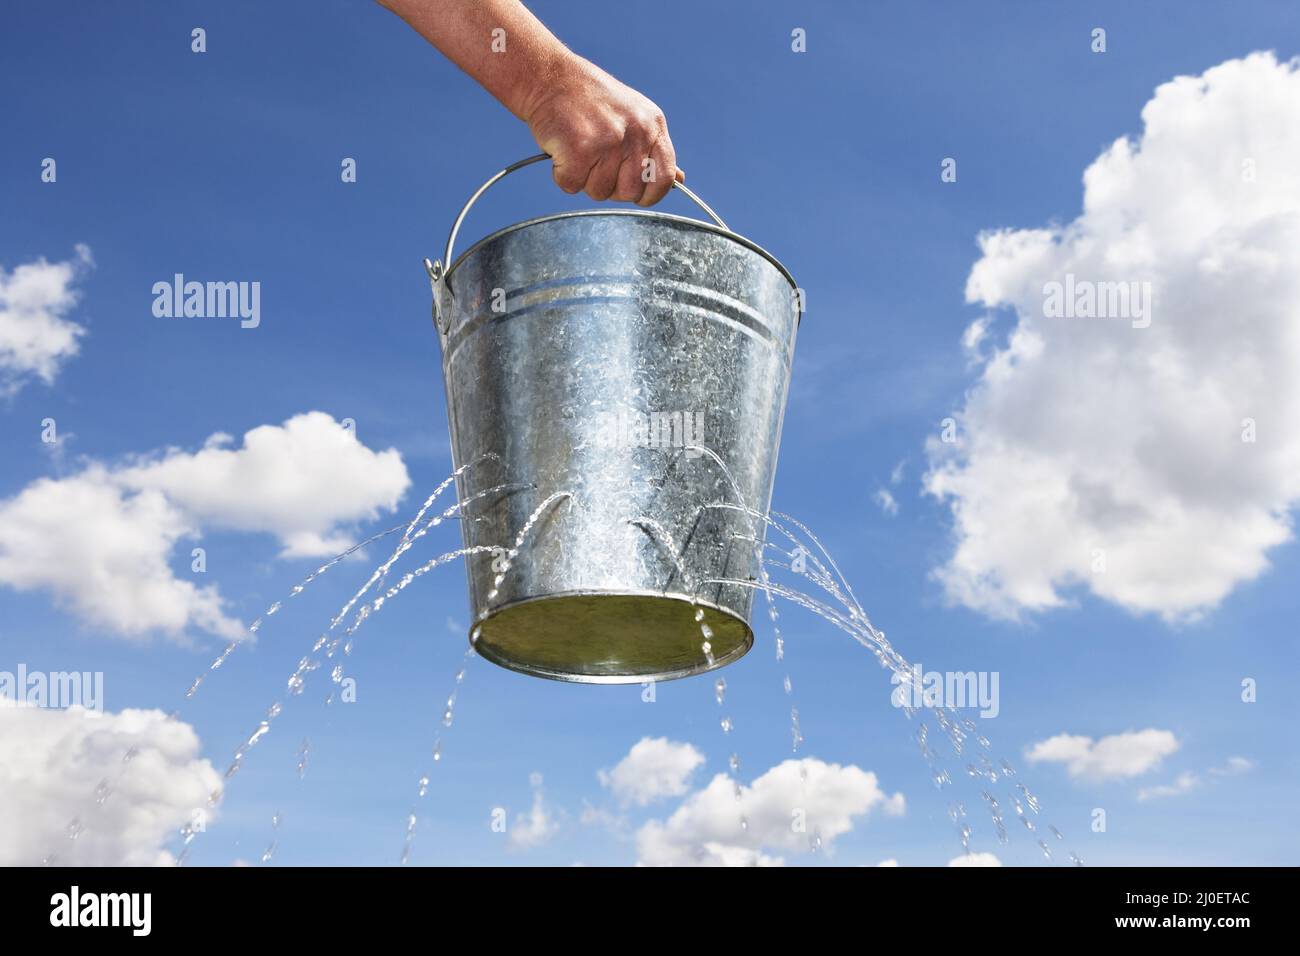 Man holding bucket with holes leaking water Stock Photo